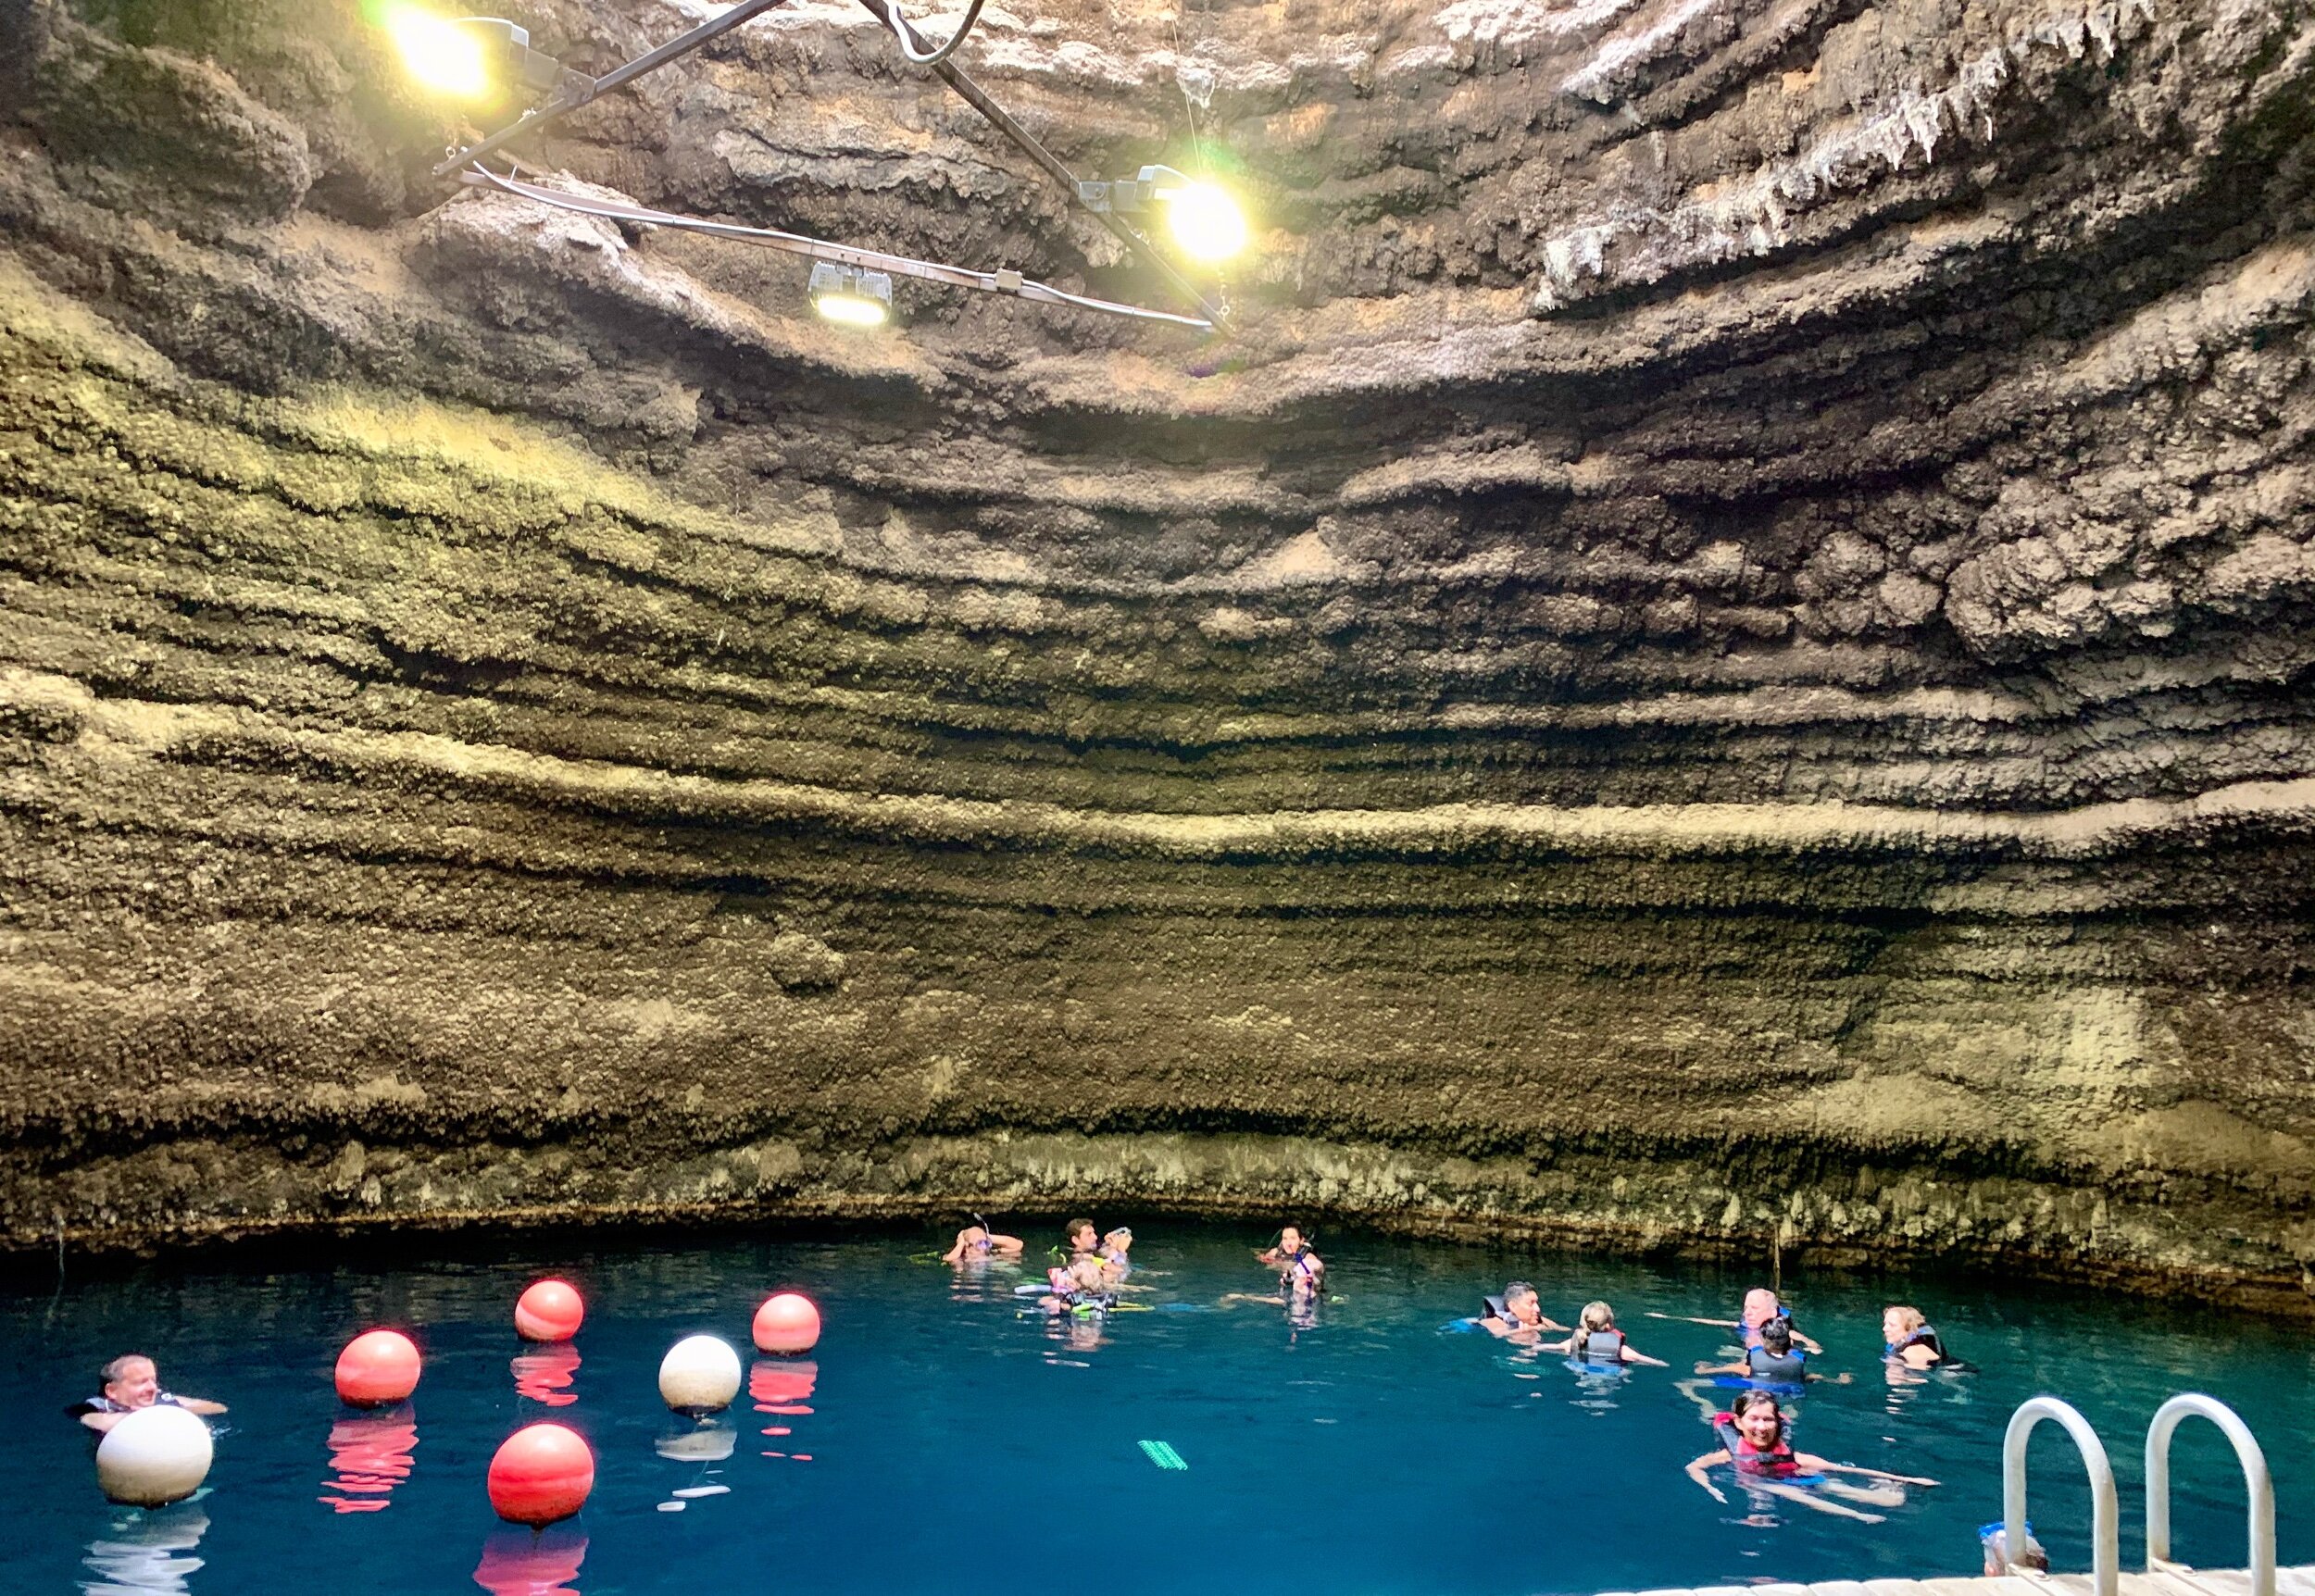  Not too far from Salt Lake City, Utah, we swam in  Homestead Crater.  The crater is a 55-foot, geothermal, beehive-shaped spring that stays around 90-95 degrees at all times. The hole at the top lets in light and fresh air. We didn't see this in our